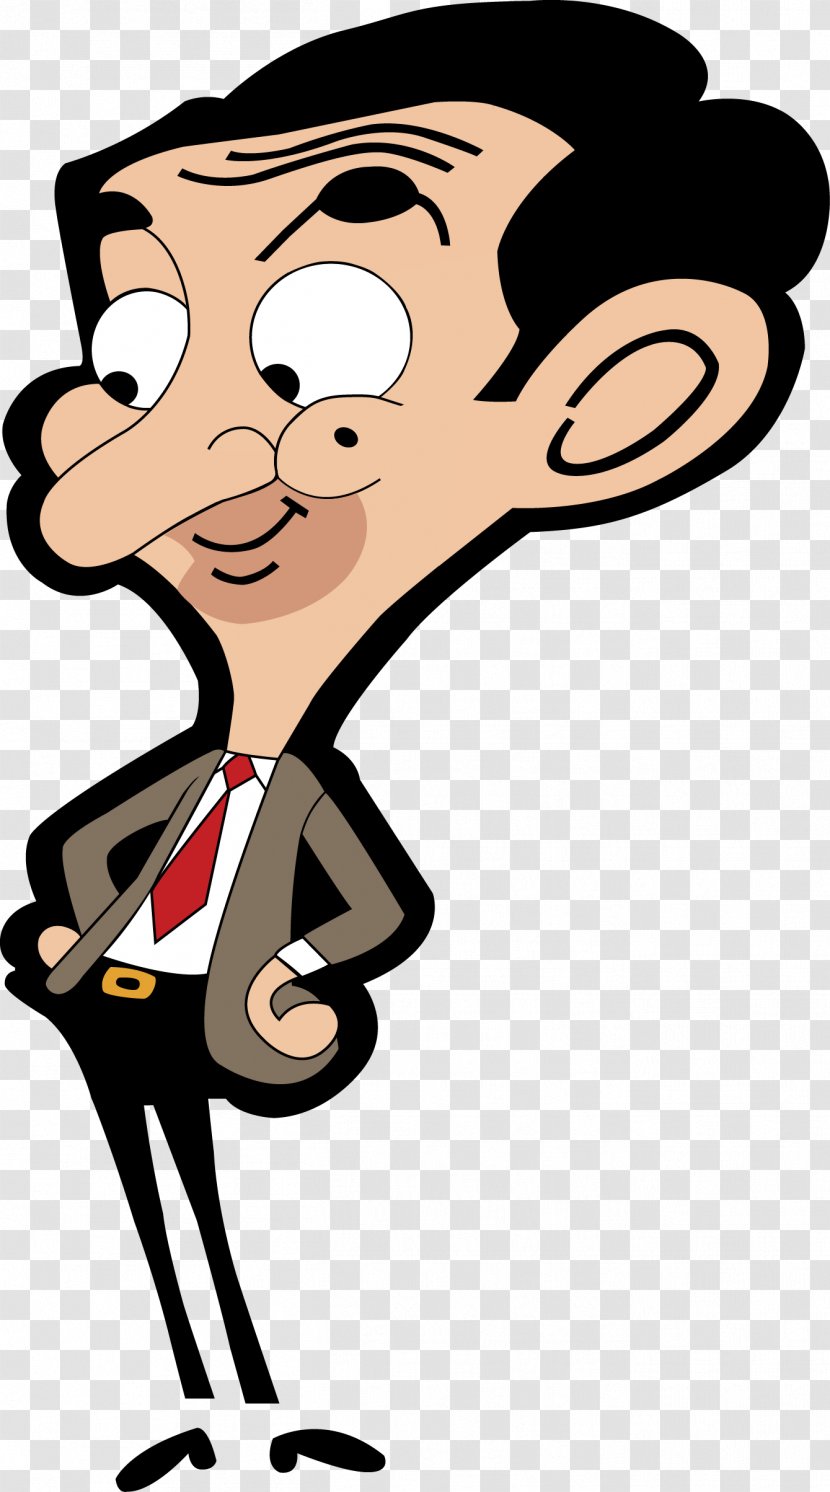 Mr. Bean Cartoon Animated Series Episode YouTube - Watercolor Transparent PNG